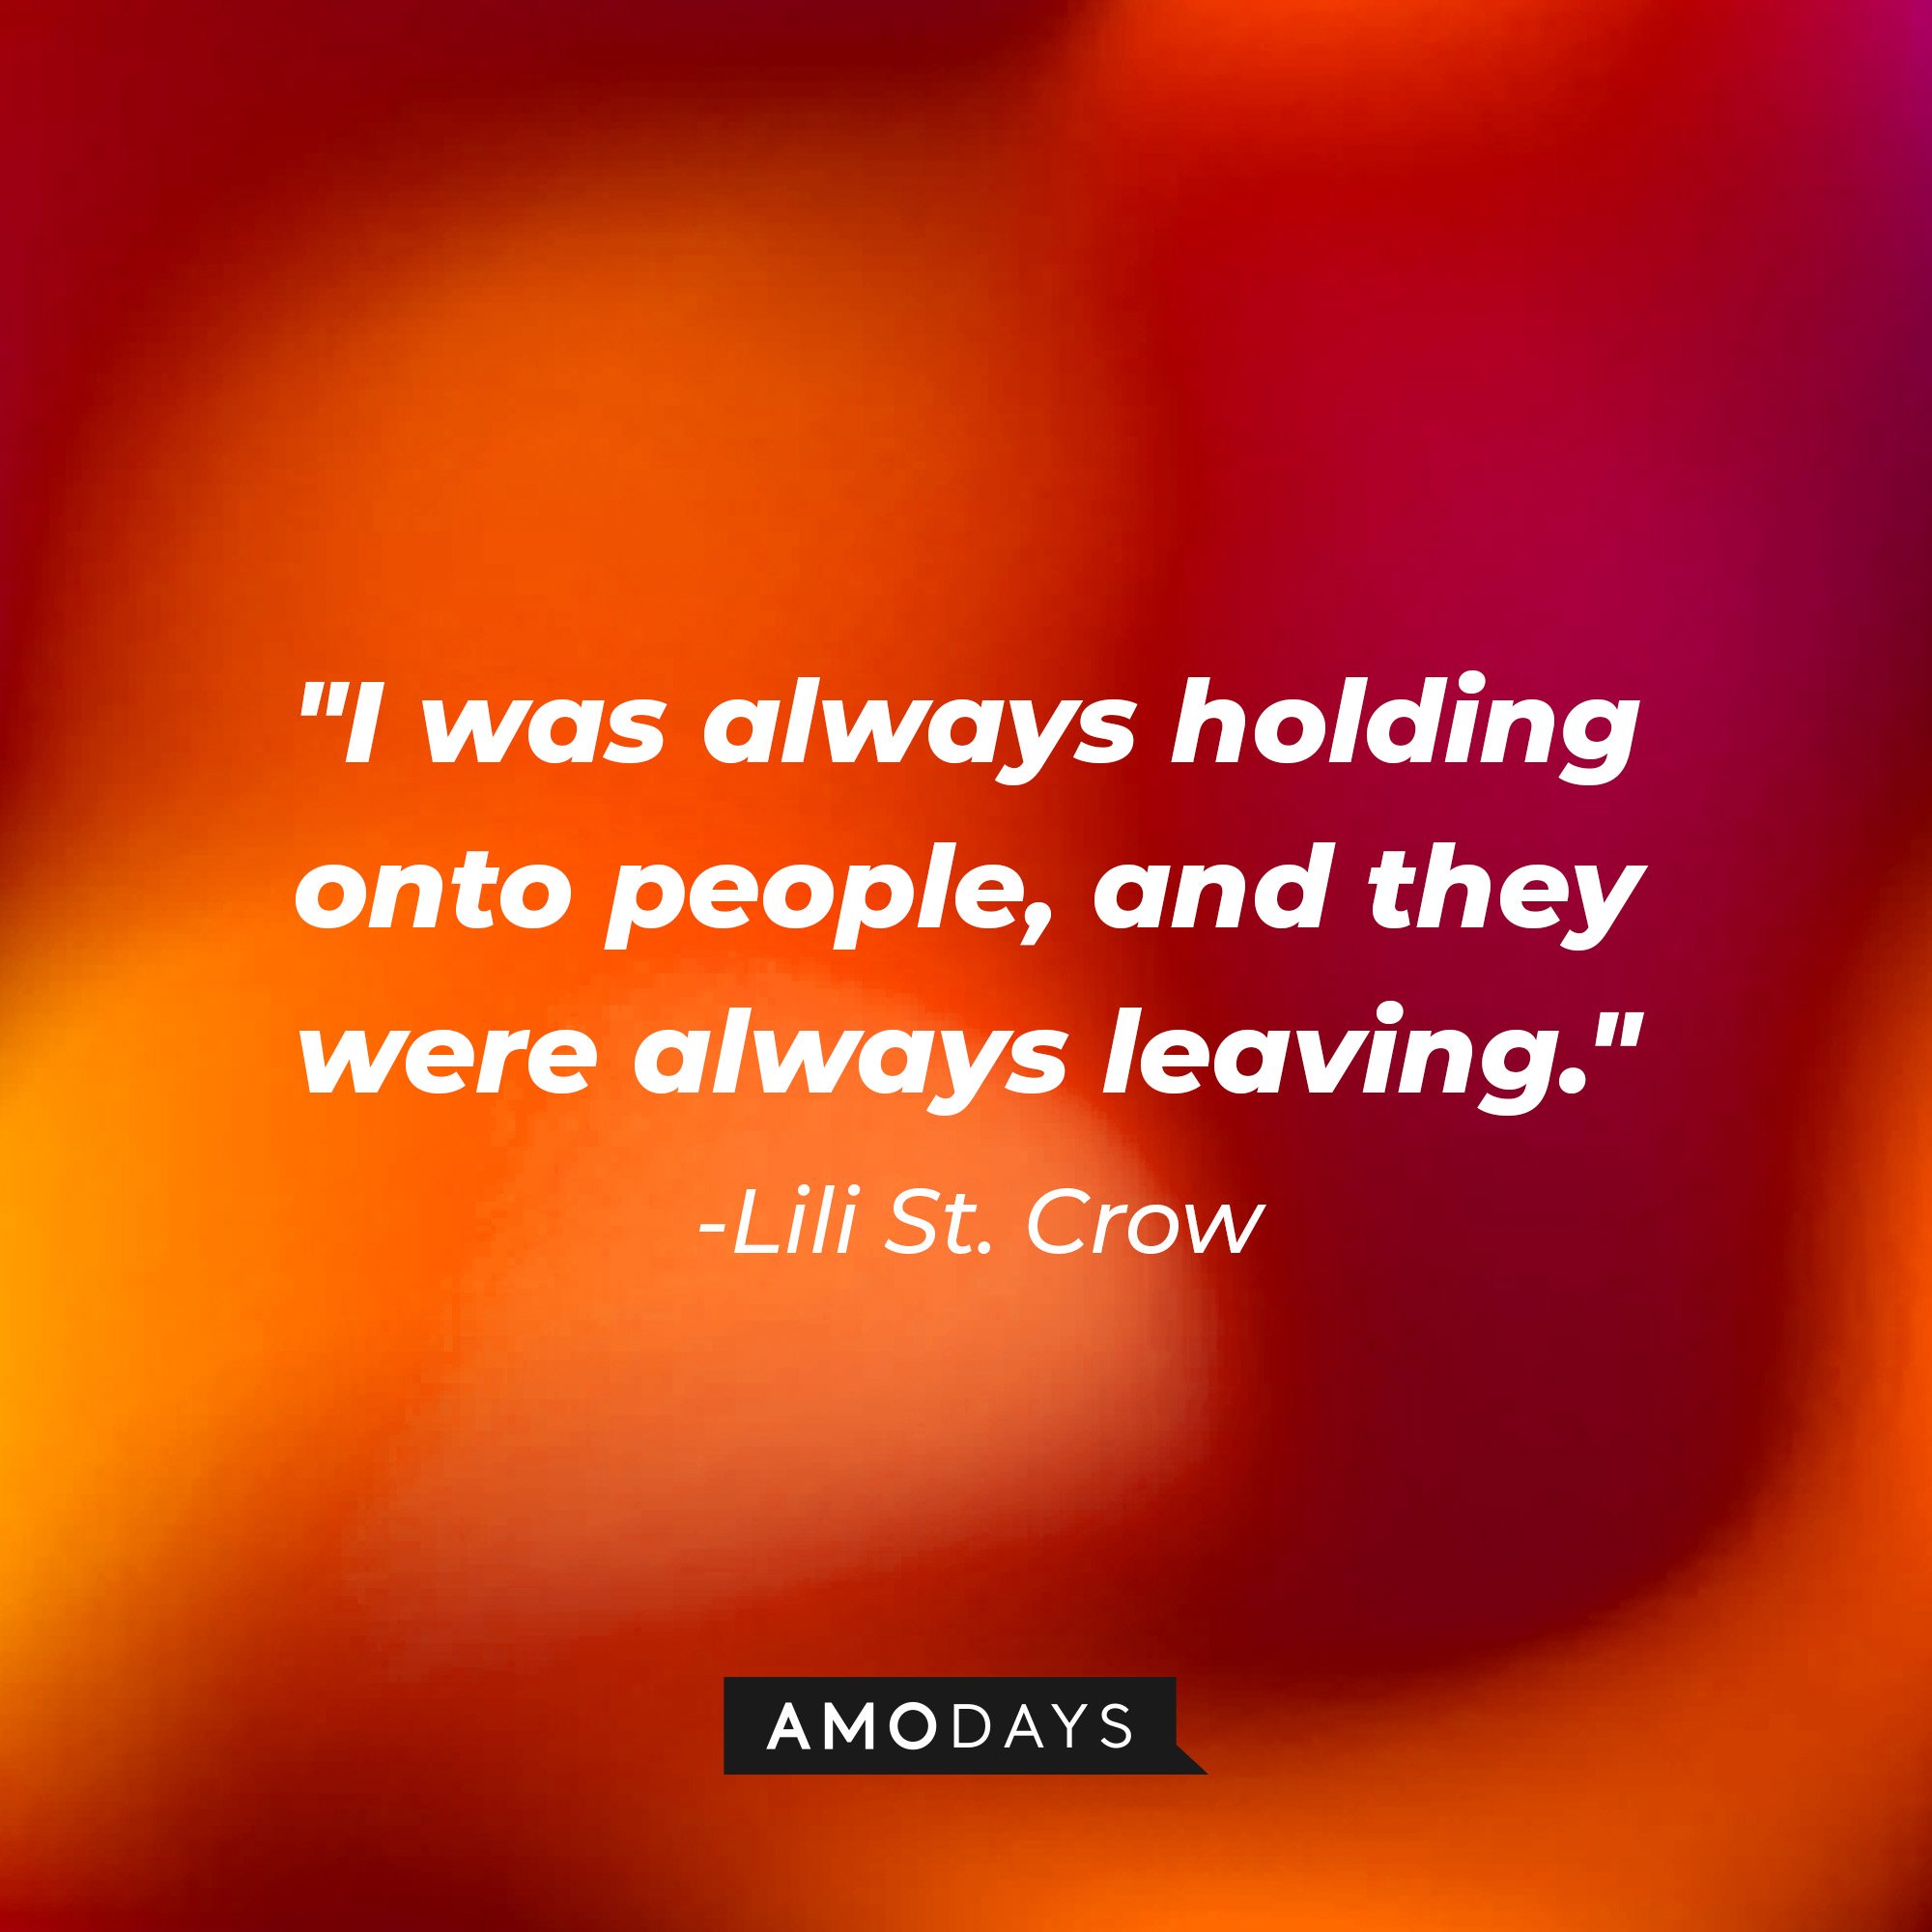 Lili St. Crow’s quote: "I was always holding onto people, and they were always leaving." | Image: AmoDays